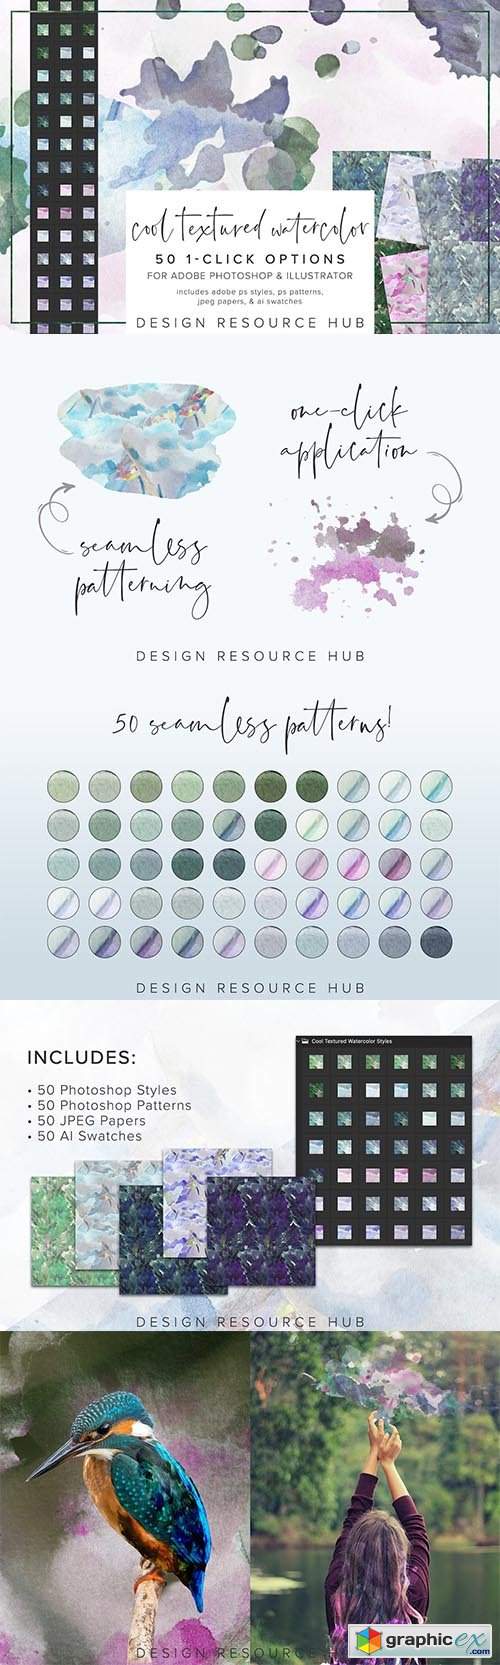 Cool Textured Watercolor PS Styles 